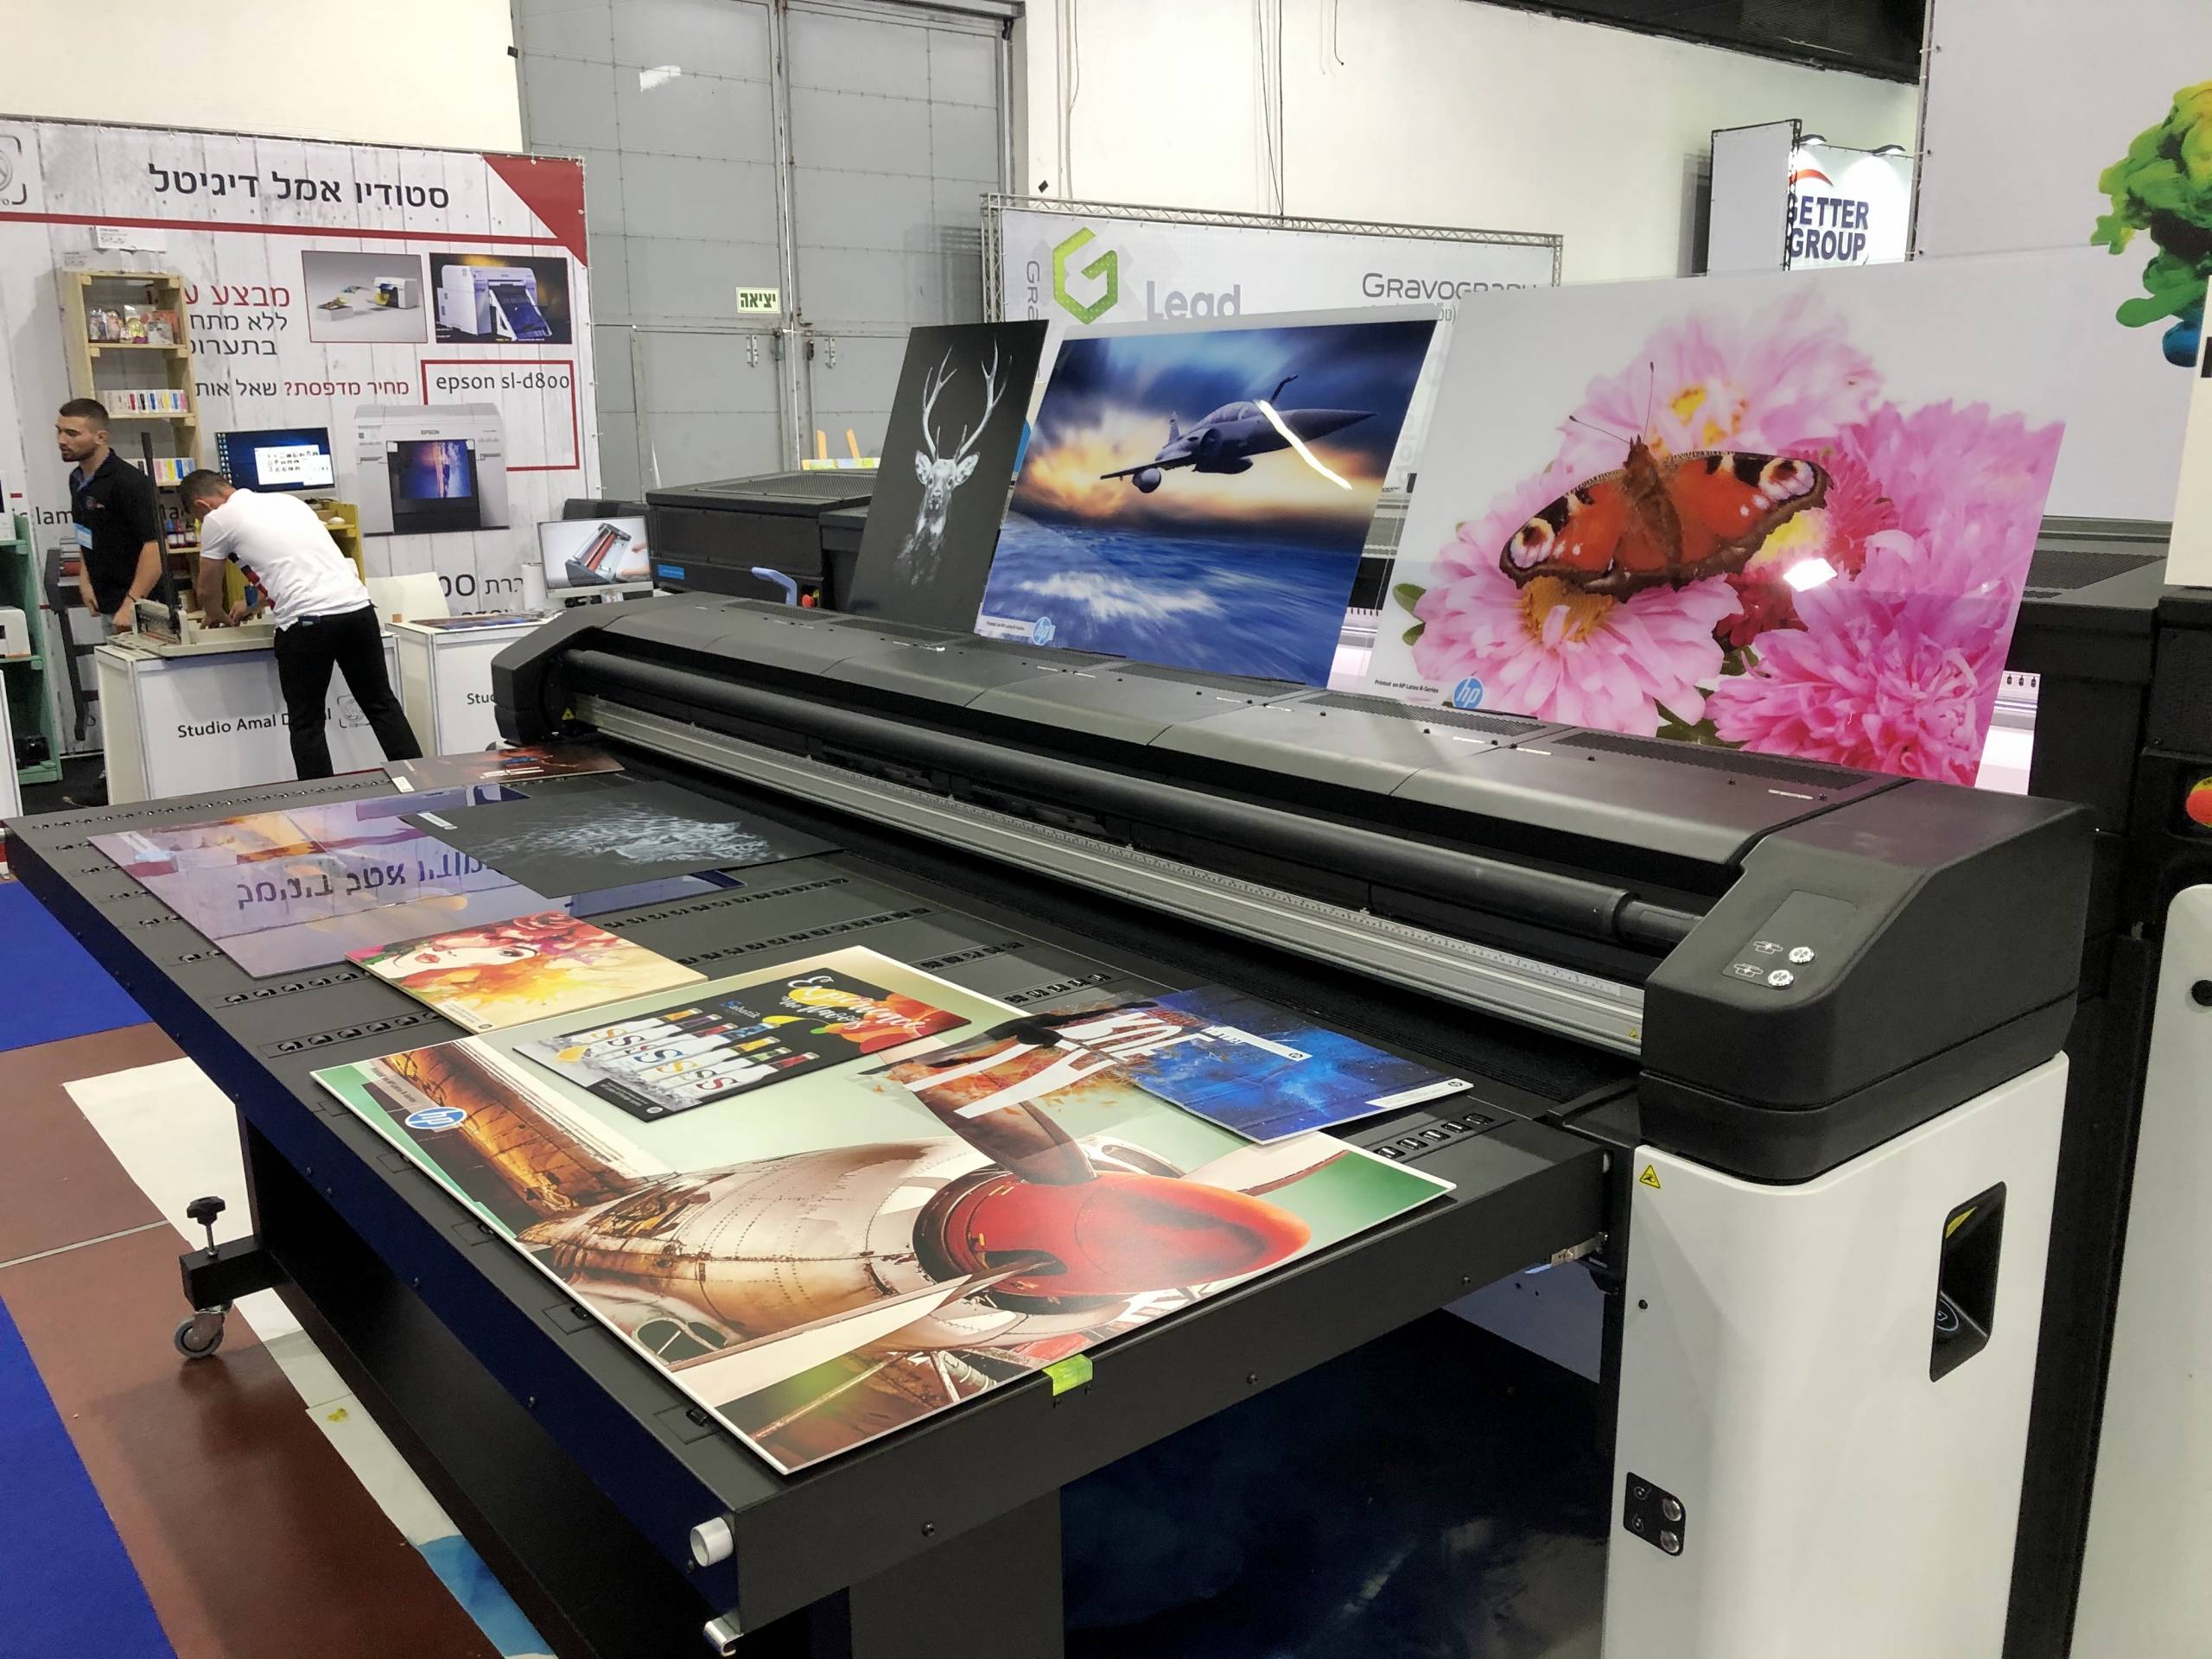 The Advantages of Print on Demand for Independent Artists and Publishers